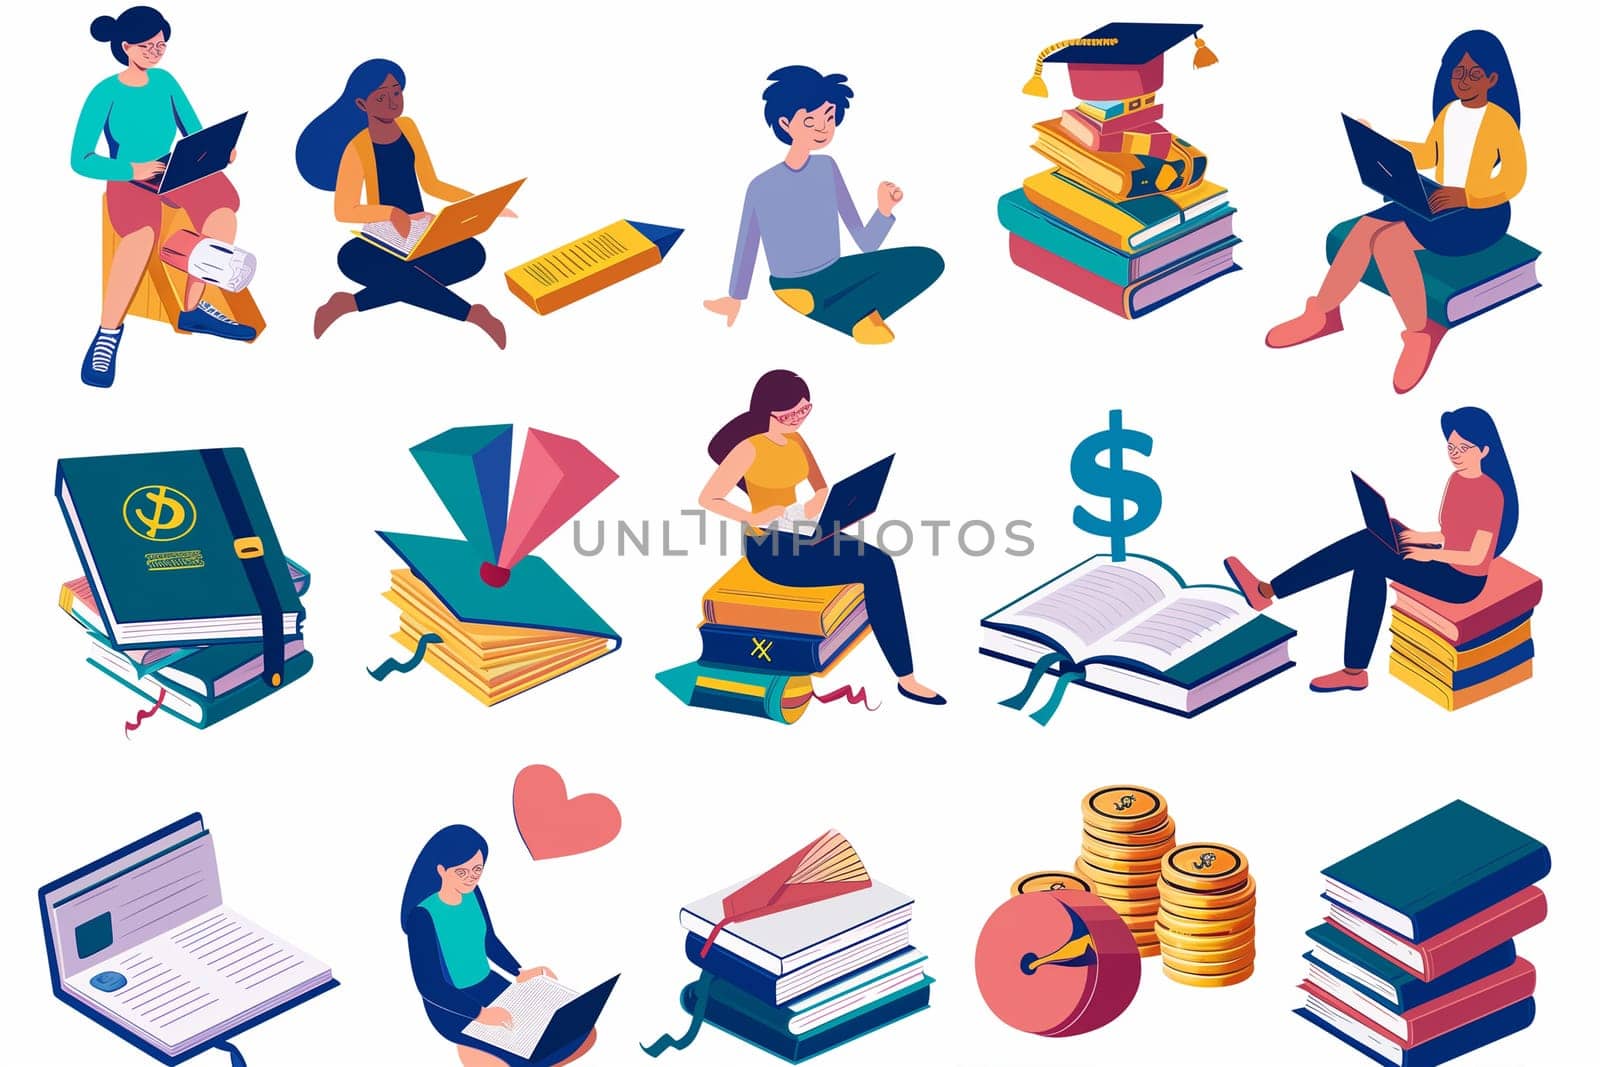 Colorful Illustration of People Engaged in Financial Literacy and Education by Sd28DimoN_1976